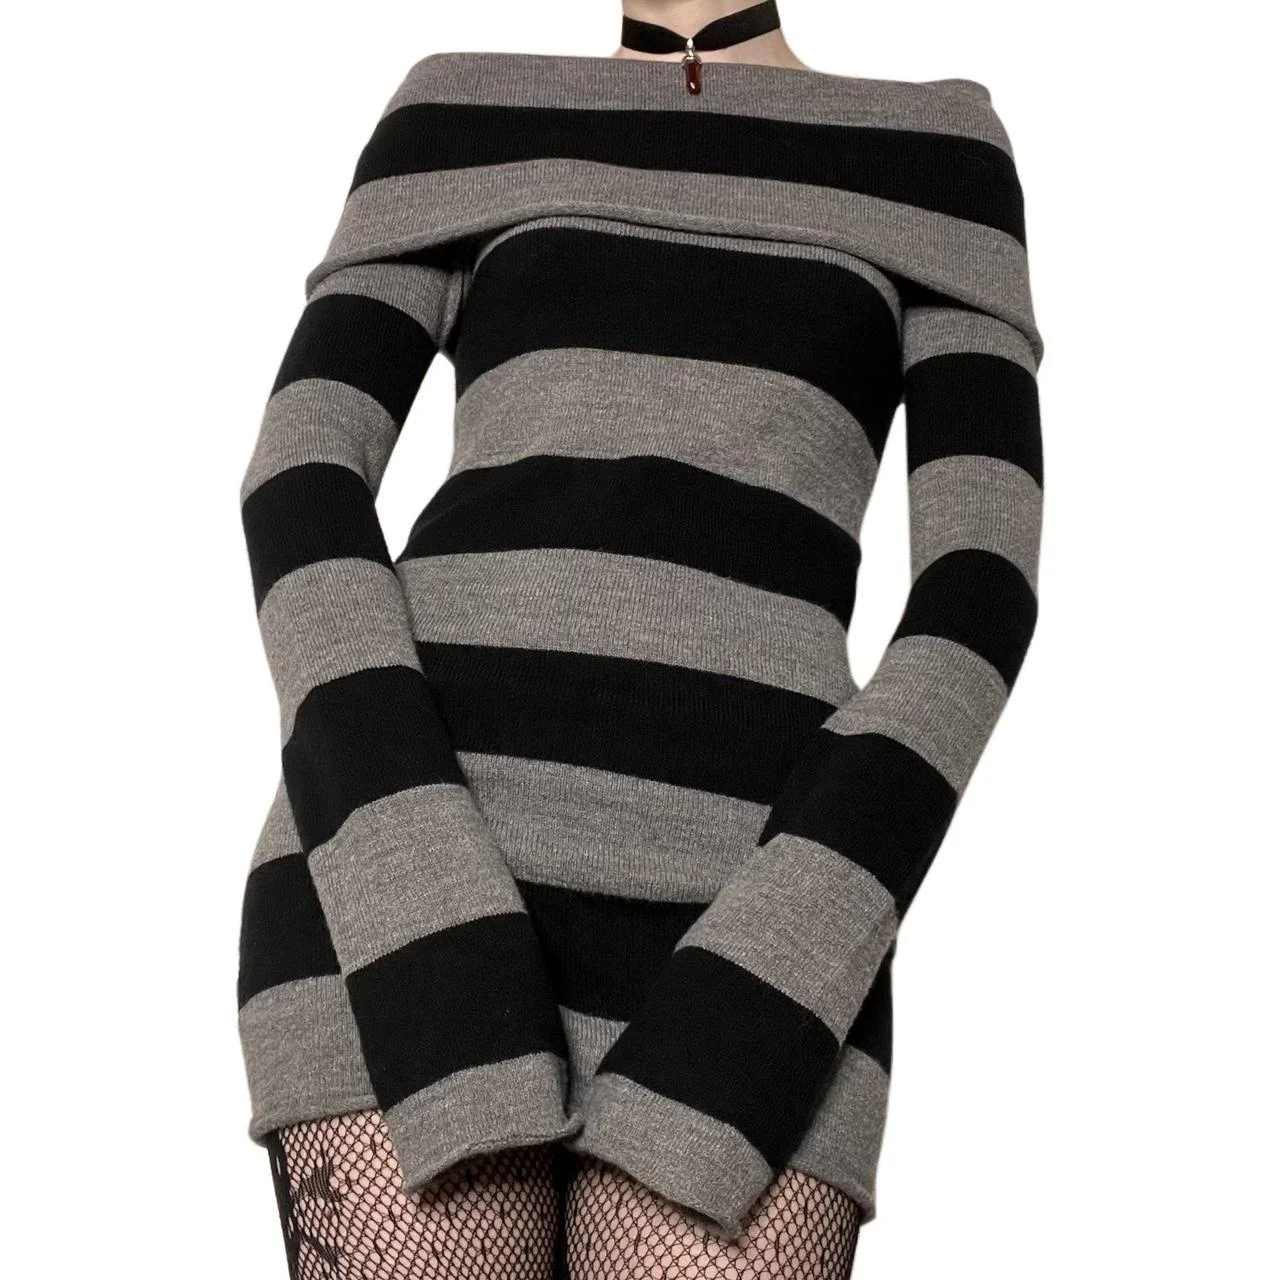 

Y2K Striped Sweater Mini Dress Mall Goth Grunge Emo Bodycon Chic Women Off Shoulder Full Sleeve Slim Fit Dresses 00s Vintage